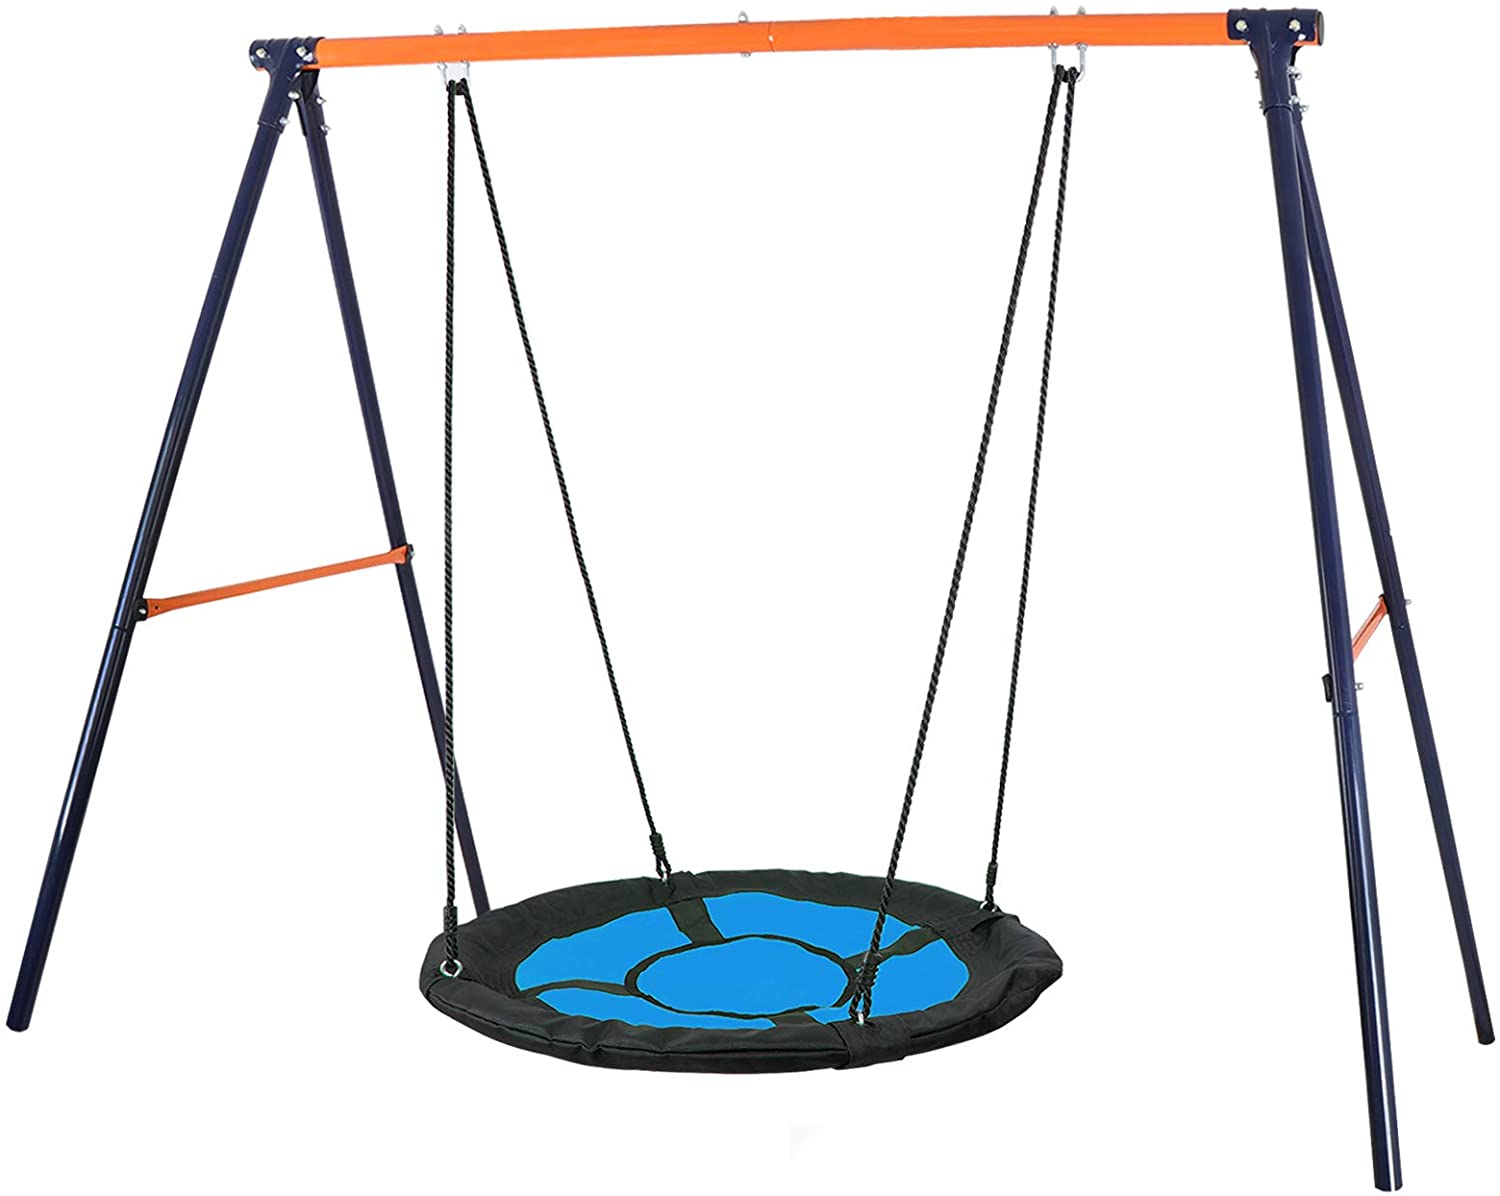 Review of SUPER DEAL Tree Swing Saucer 72